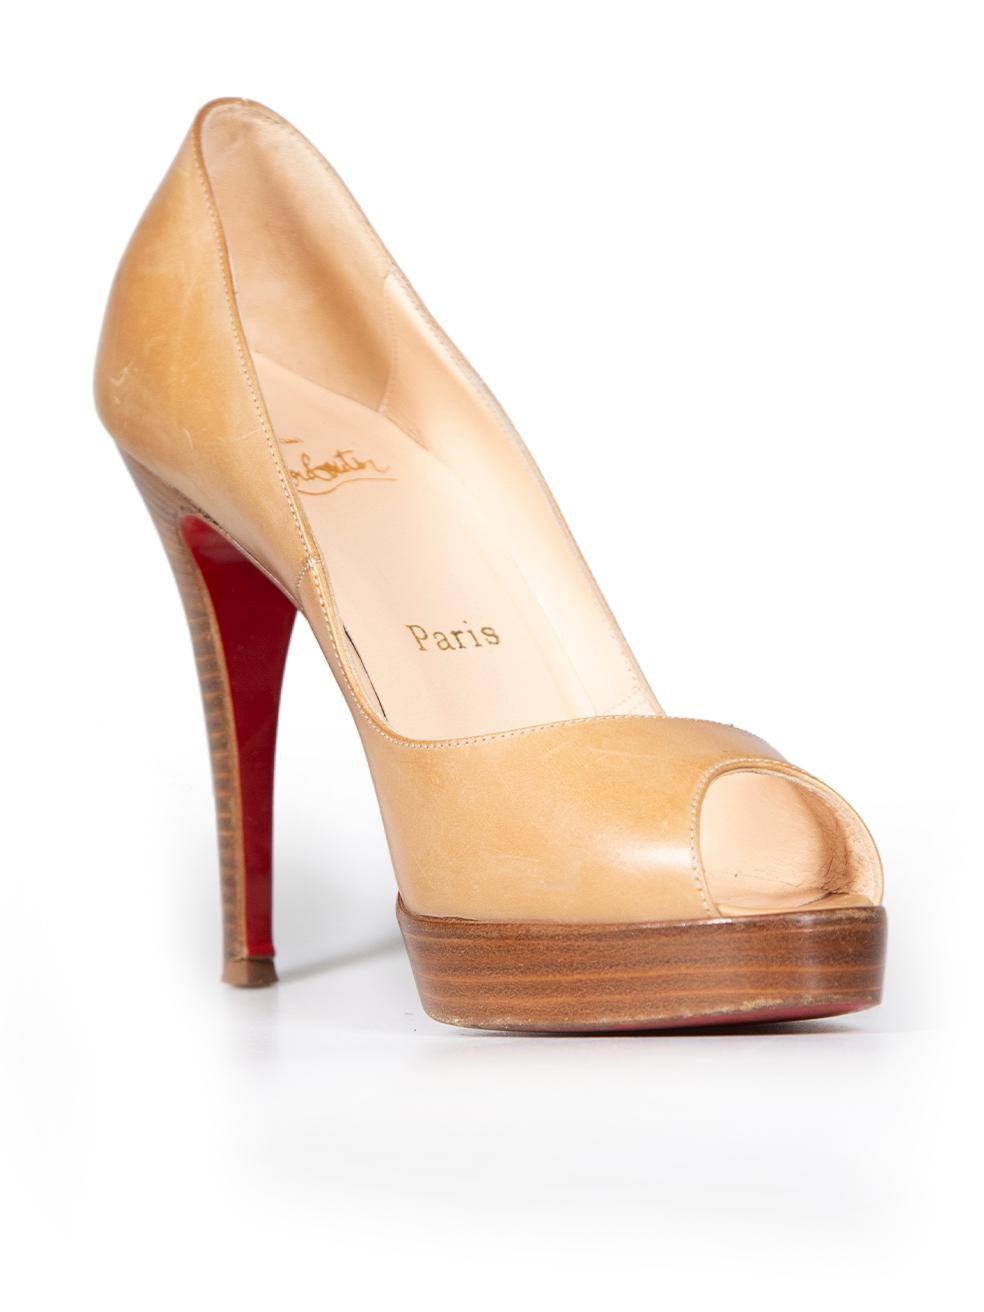 CONDITION is Good. General wear to shoes is evident. Moderate signs of wear to both sides, heels and toes of both shoes with abrasions, marks and scratches to the leather on this used Christian Louboutin designer resale item.
 
 
 
 Details
 
 
